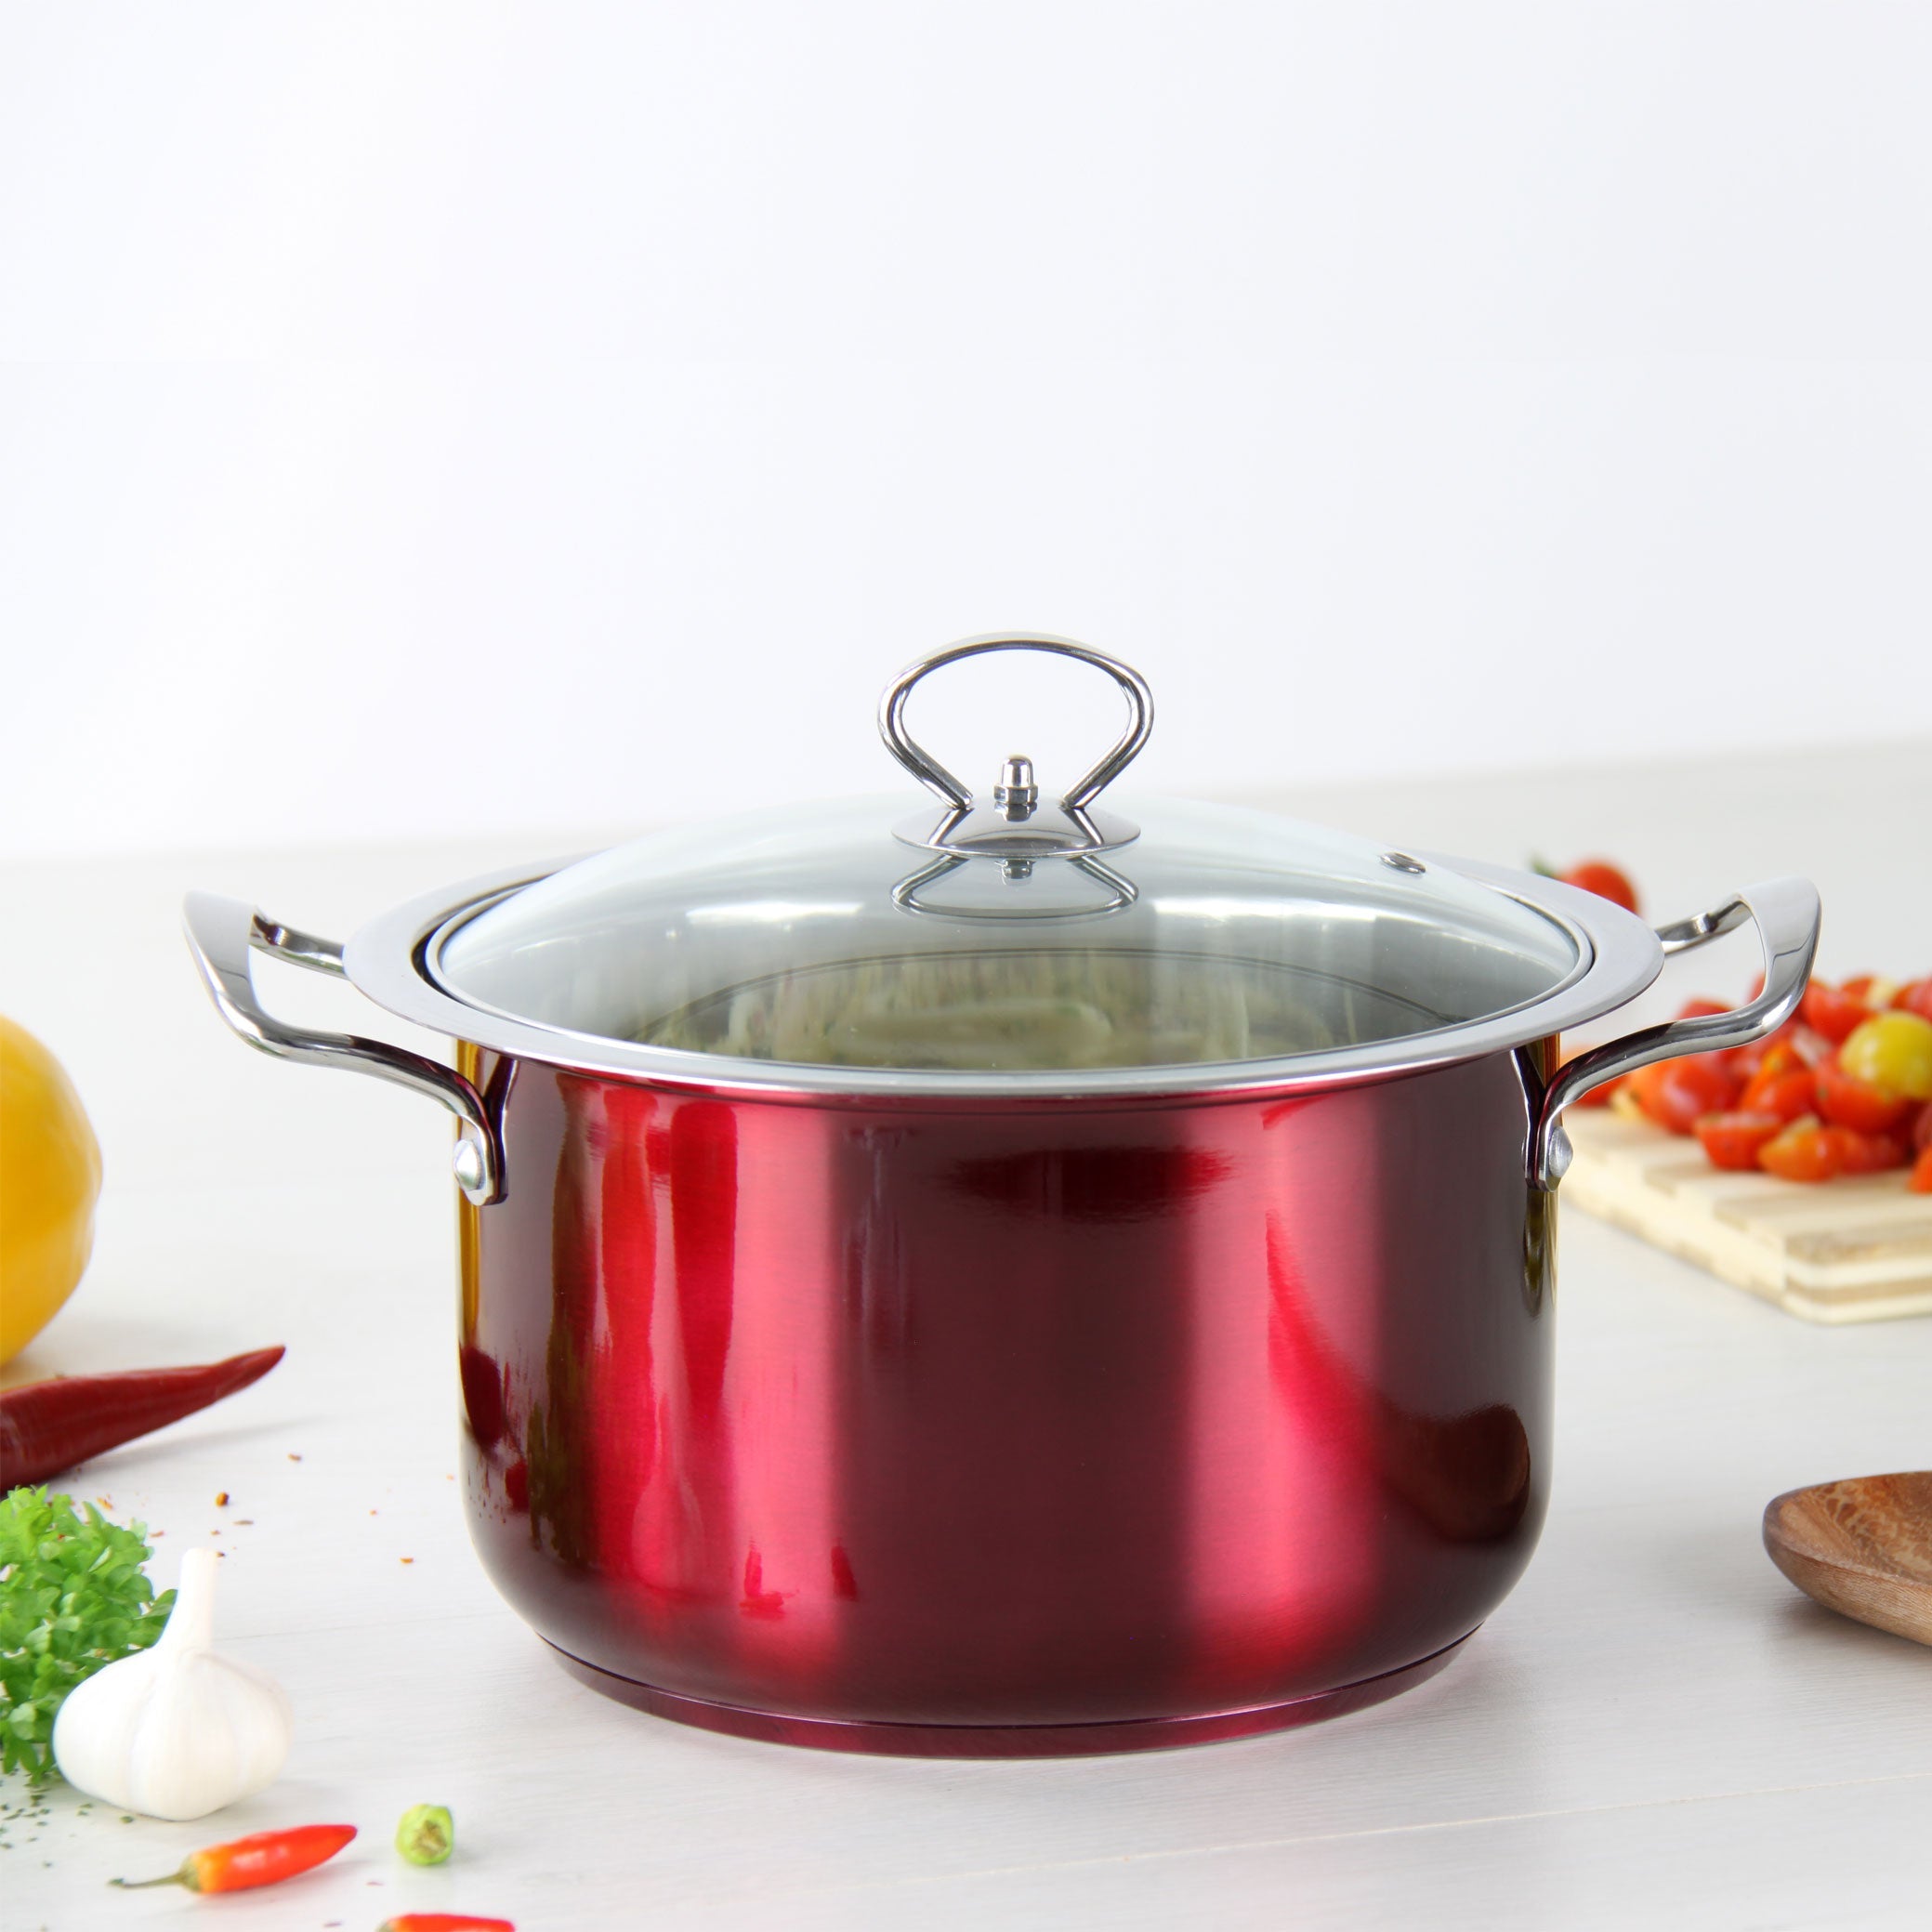 Stainless Steel Stockpot - Induction Base - RUBY -20cm